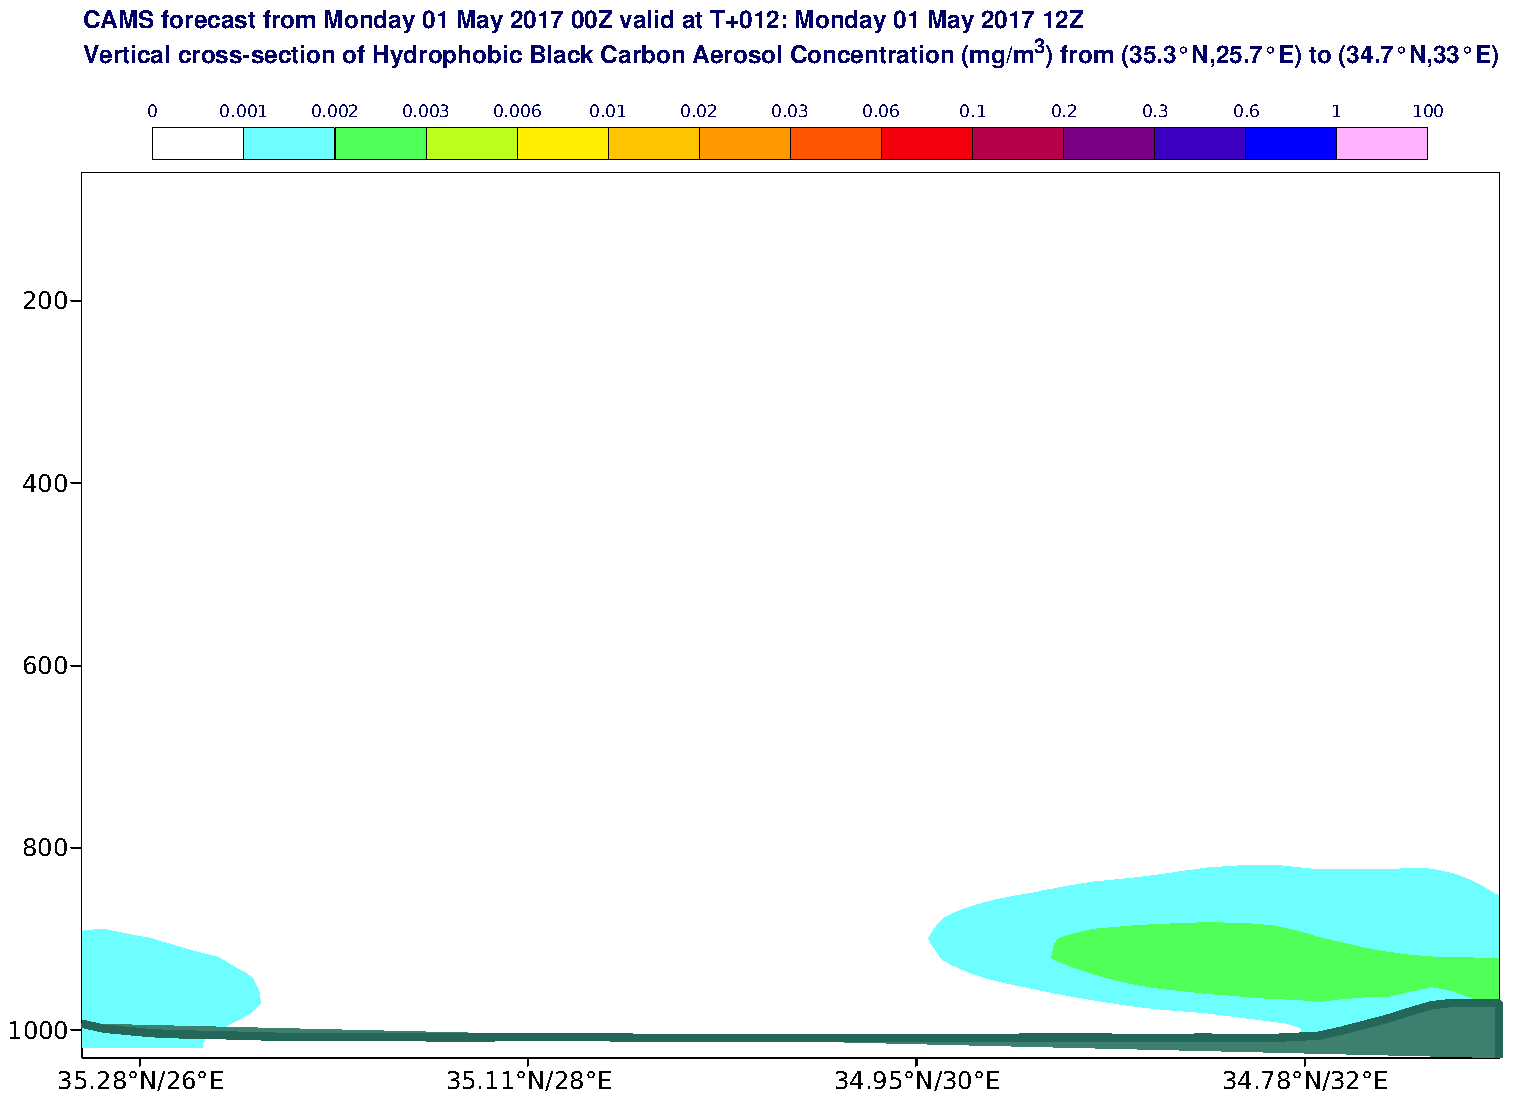 Vertical cross-section of Hydrophobic Black Carbon Aerosol Concentration (mg/m3) valid at T12 - 2017-05-01 12:00